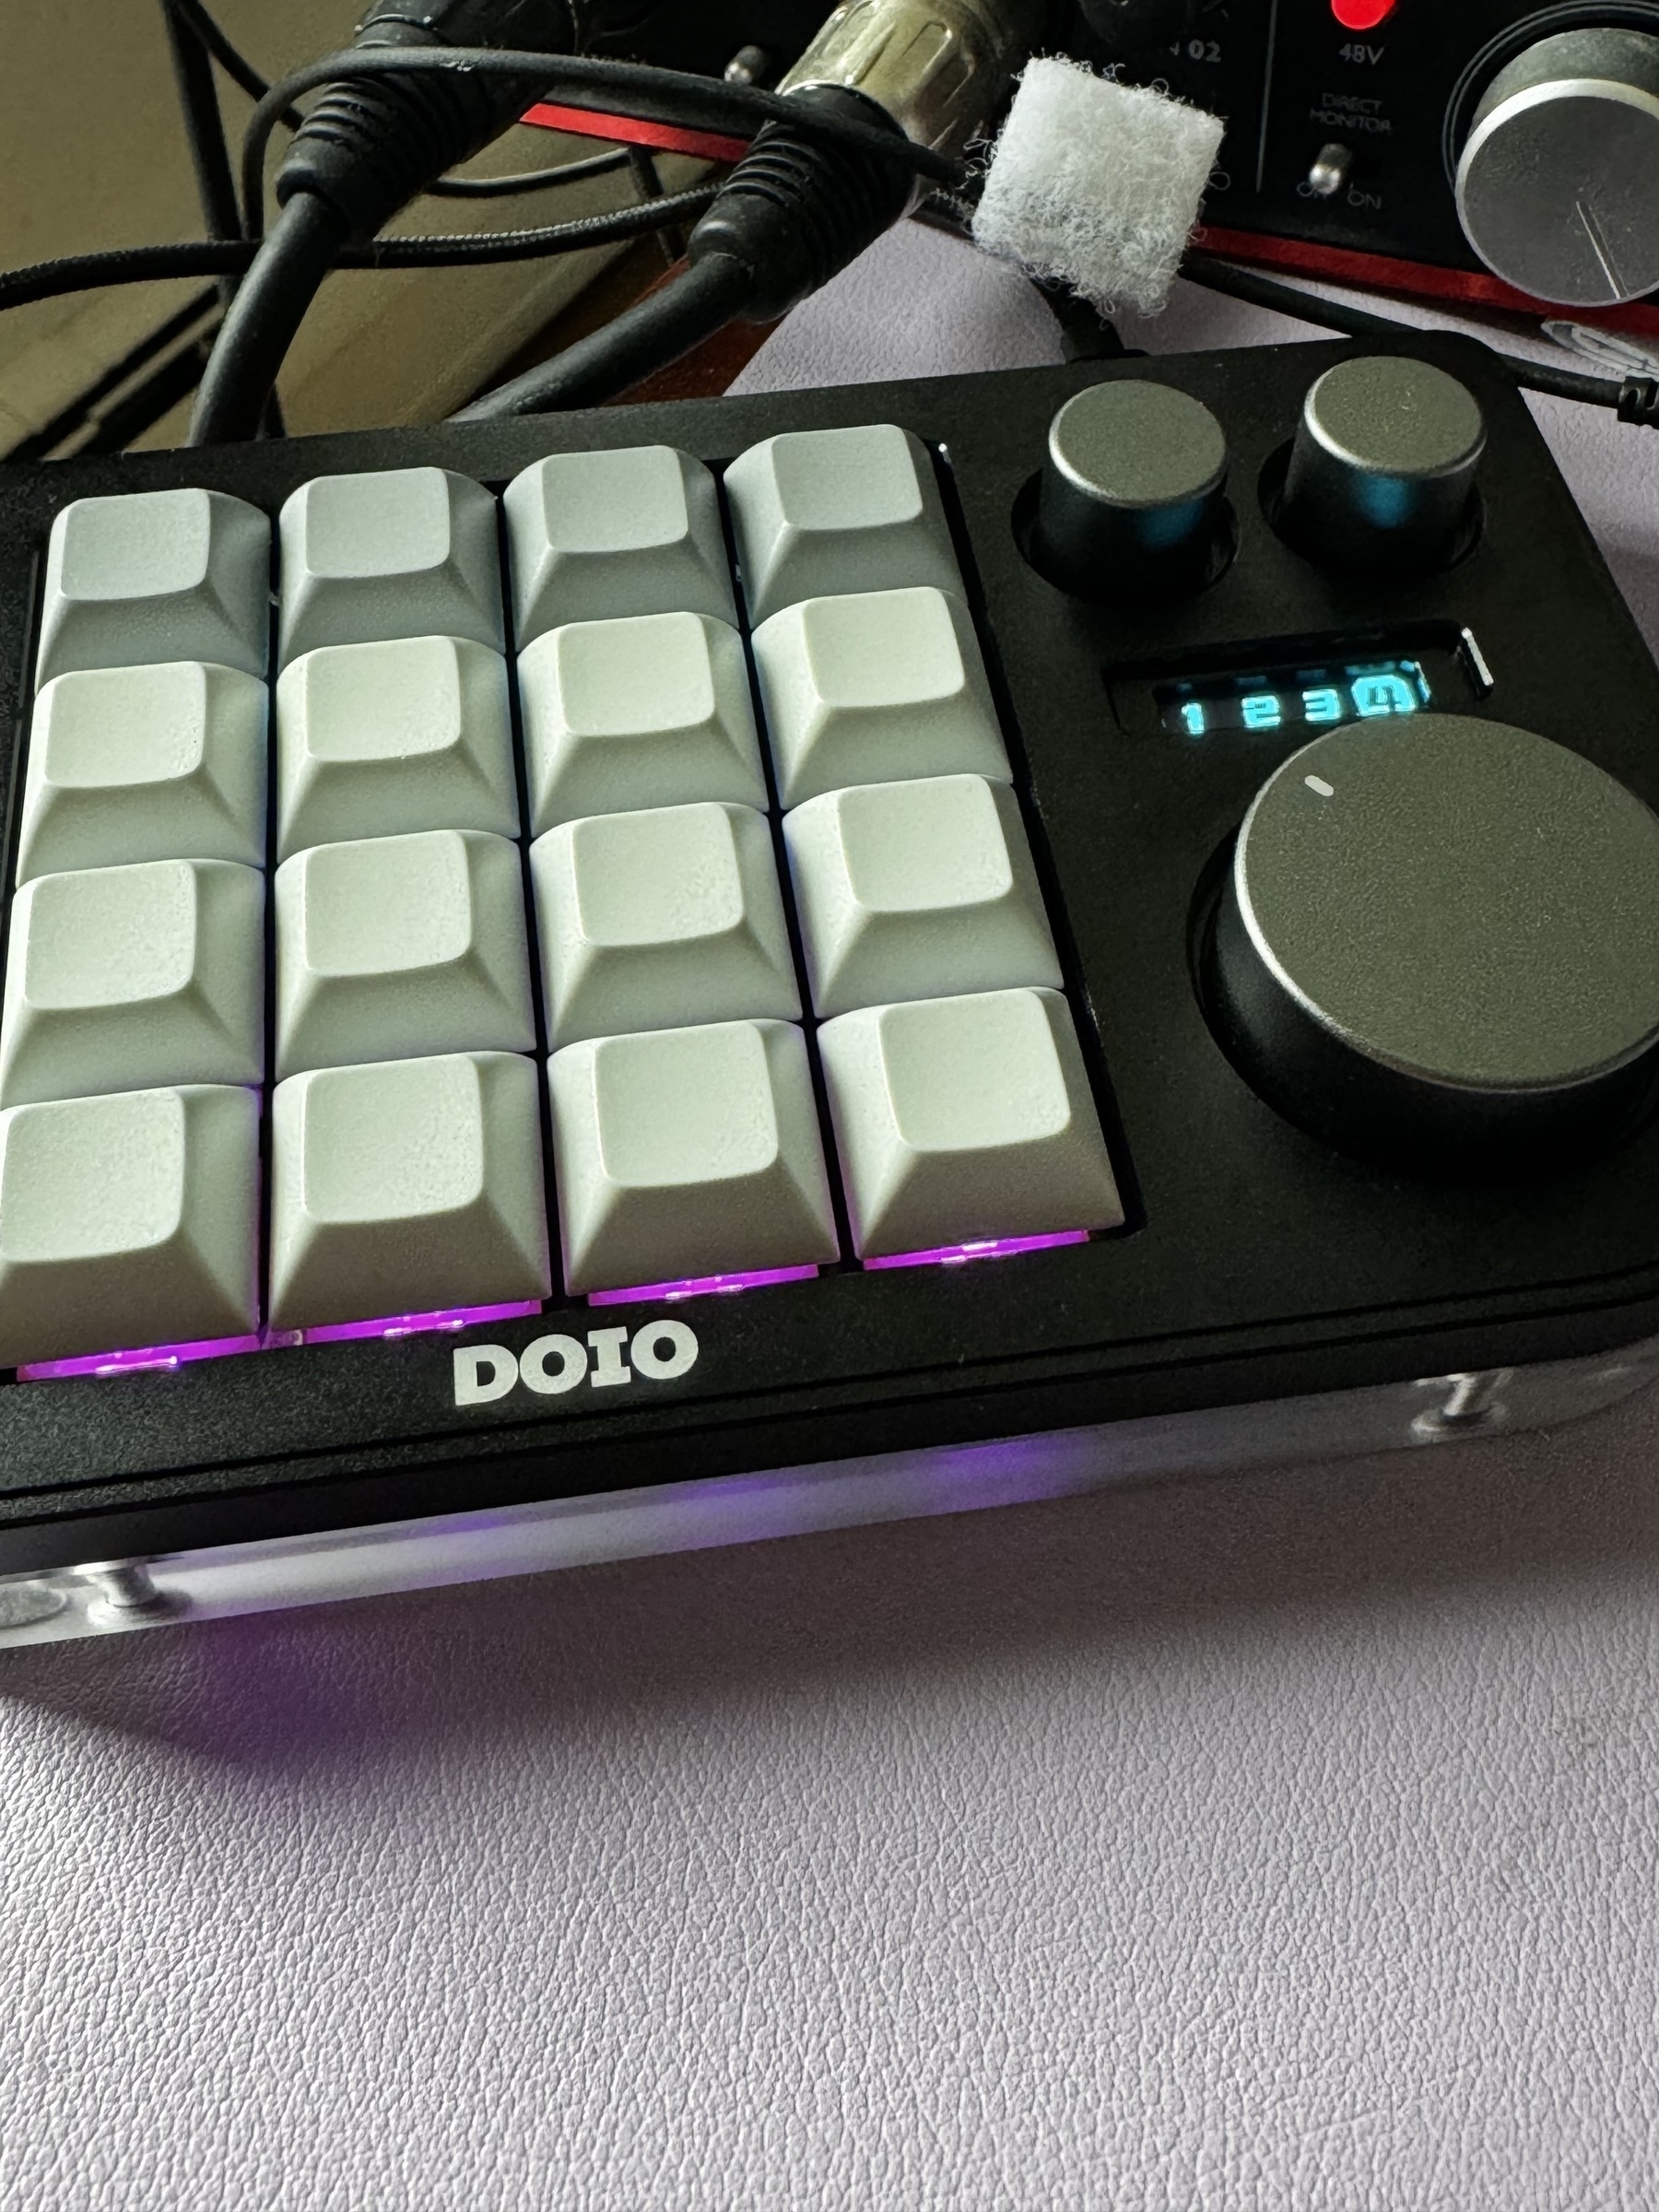 A black and white mini macro pad with 16 backlit keys, 3 knobs, and a small screen.